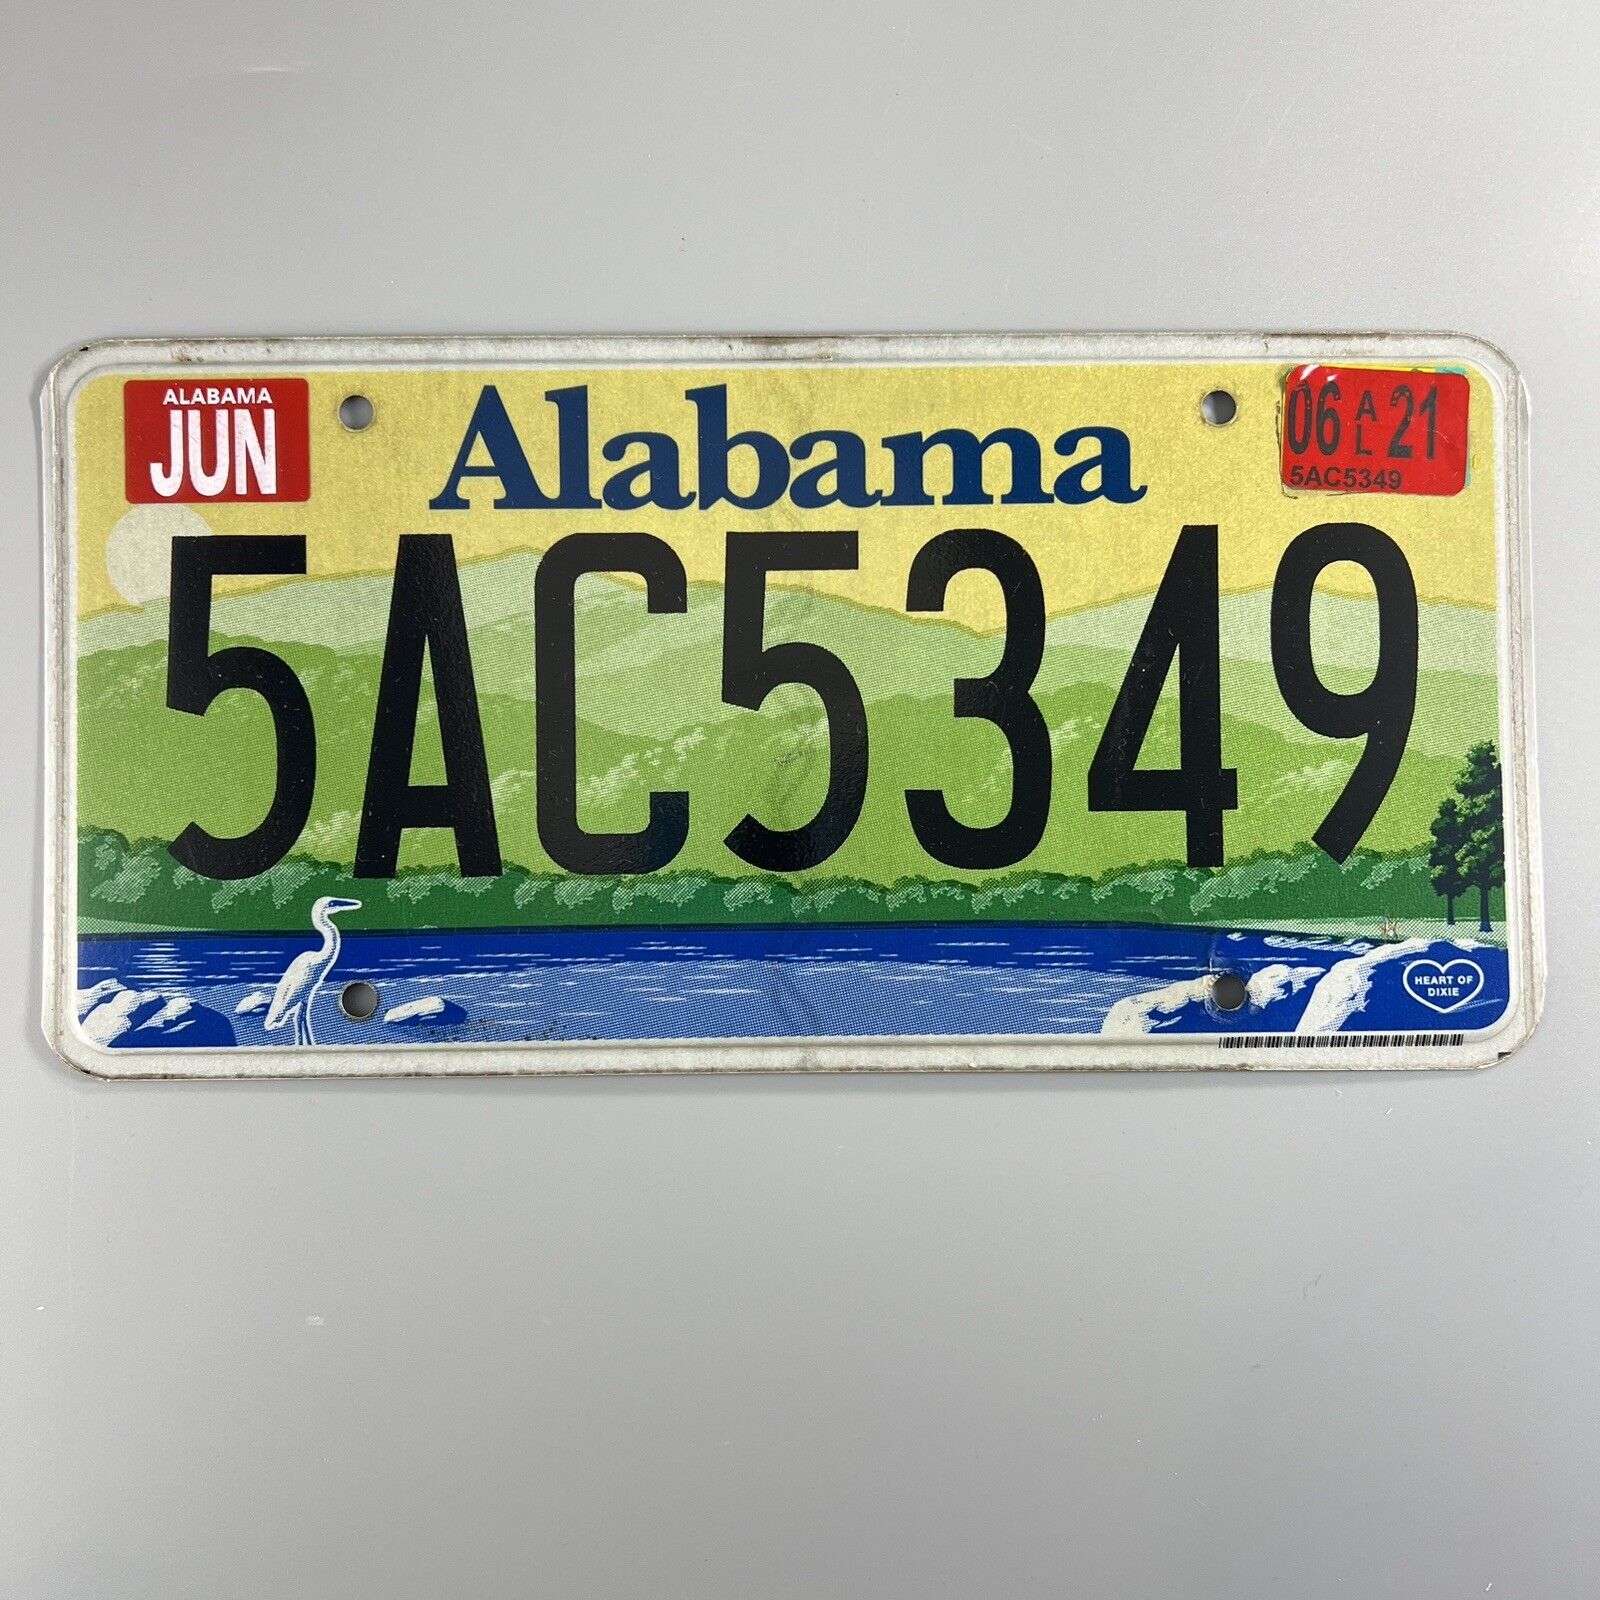 2021 Alabama State License Plate Sunrise over Water Expired 5AC5349